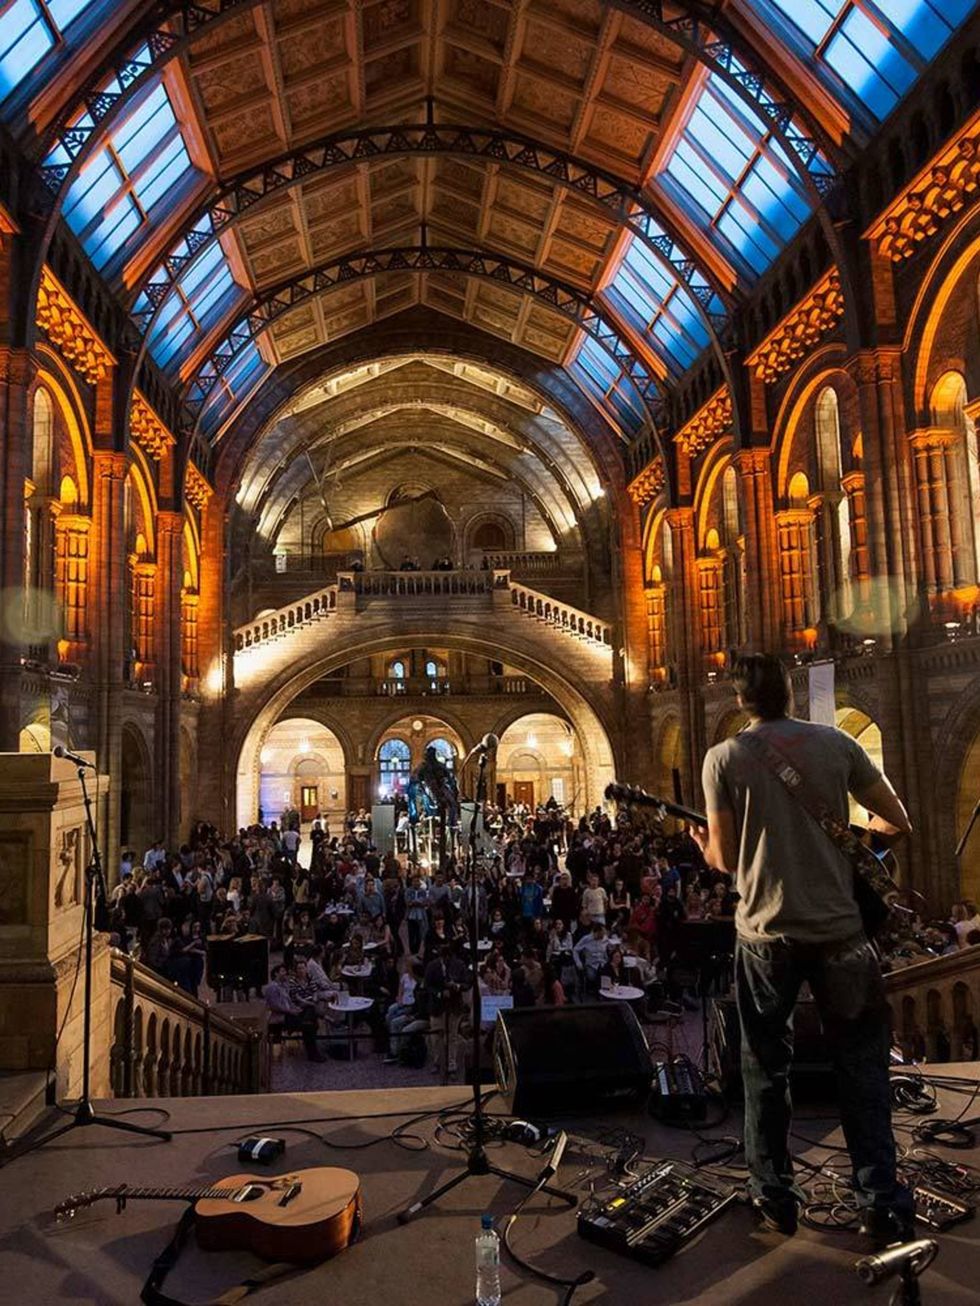 <p><strong>NIGHT OUT: Natural History Museum Lates</strong></p>

<p>Roam amongst the dinosaurs and enjoy a night at the Museum with the Natural History Museums late nights. Taking place every last Friday of the month, February will see a natural way to s